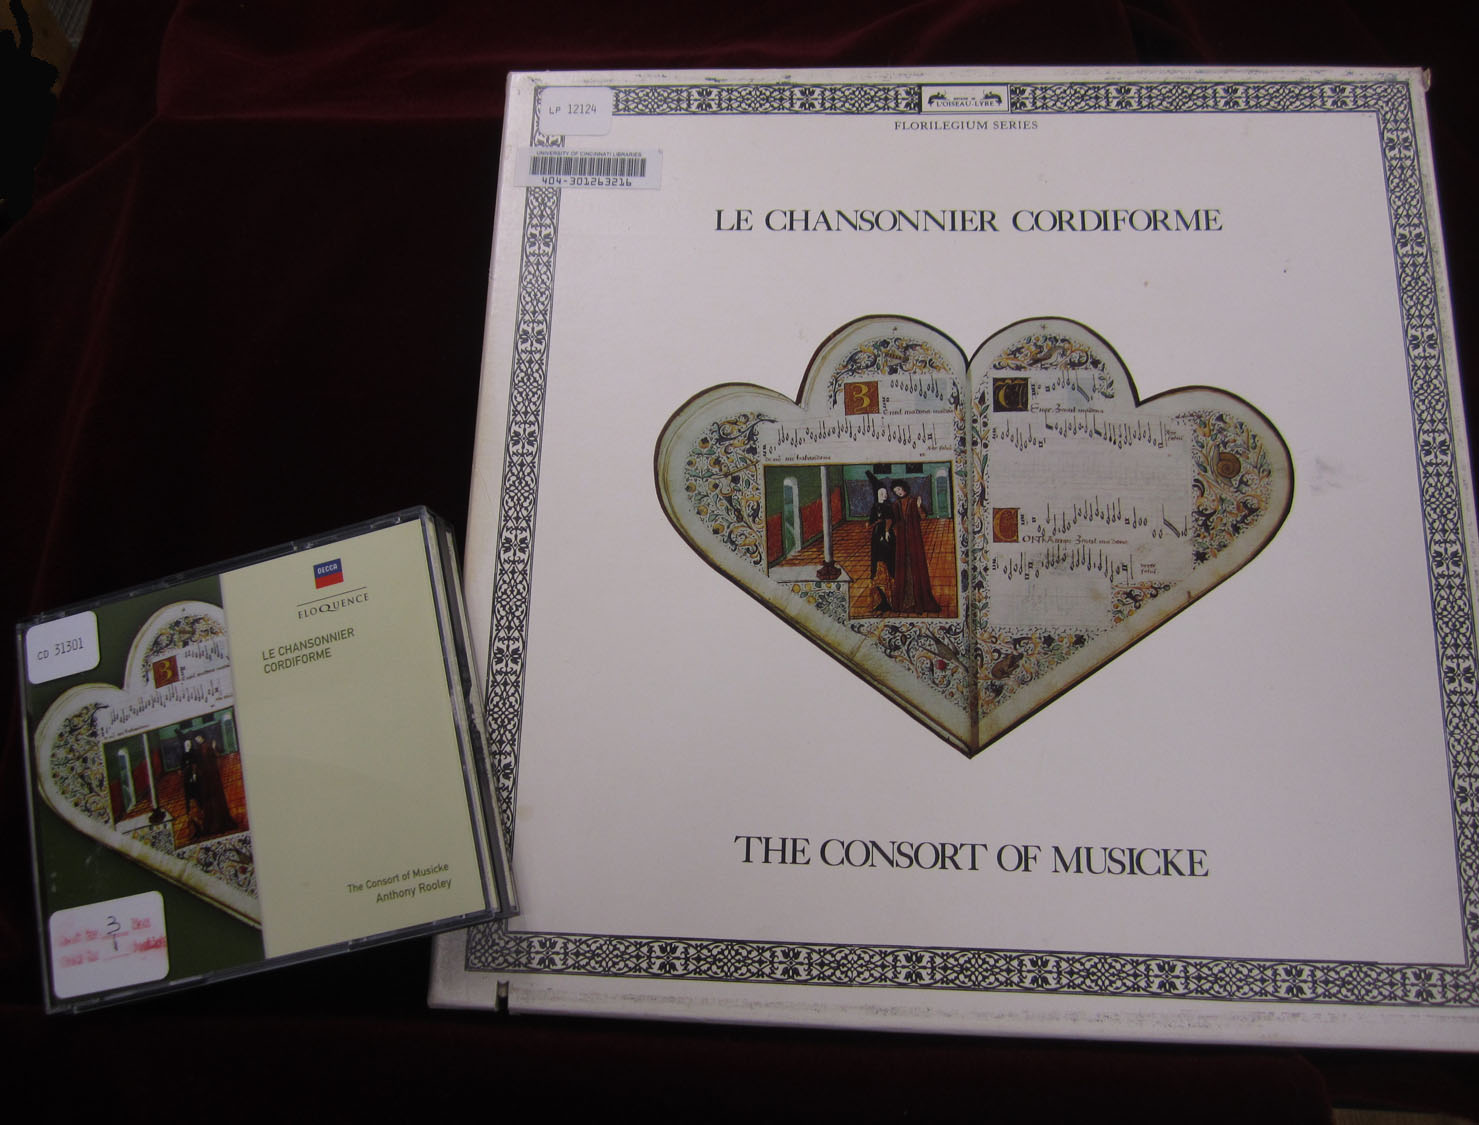 Recordings of the Le Chansonnier Cordiforme are available in the CCM Library